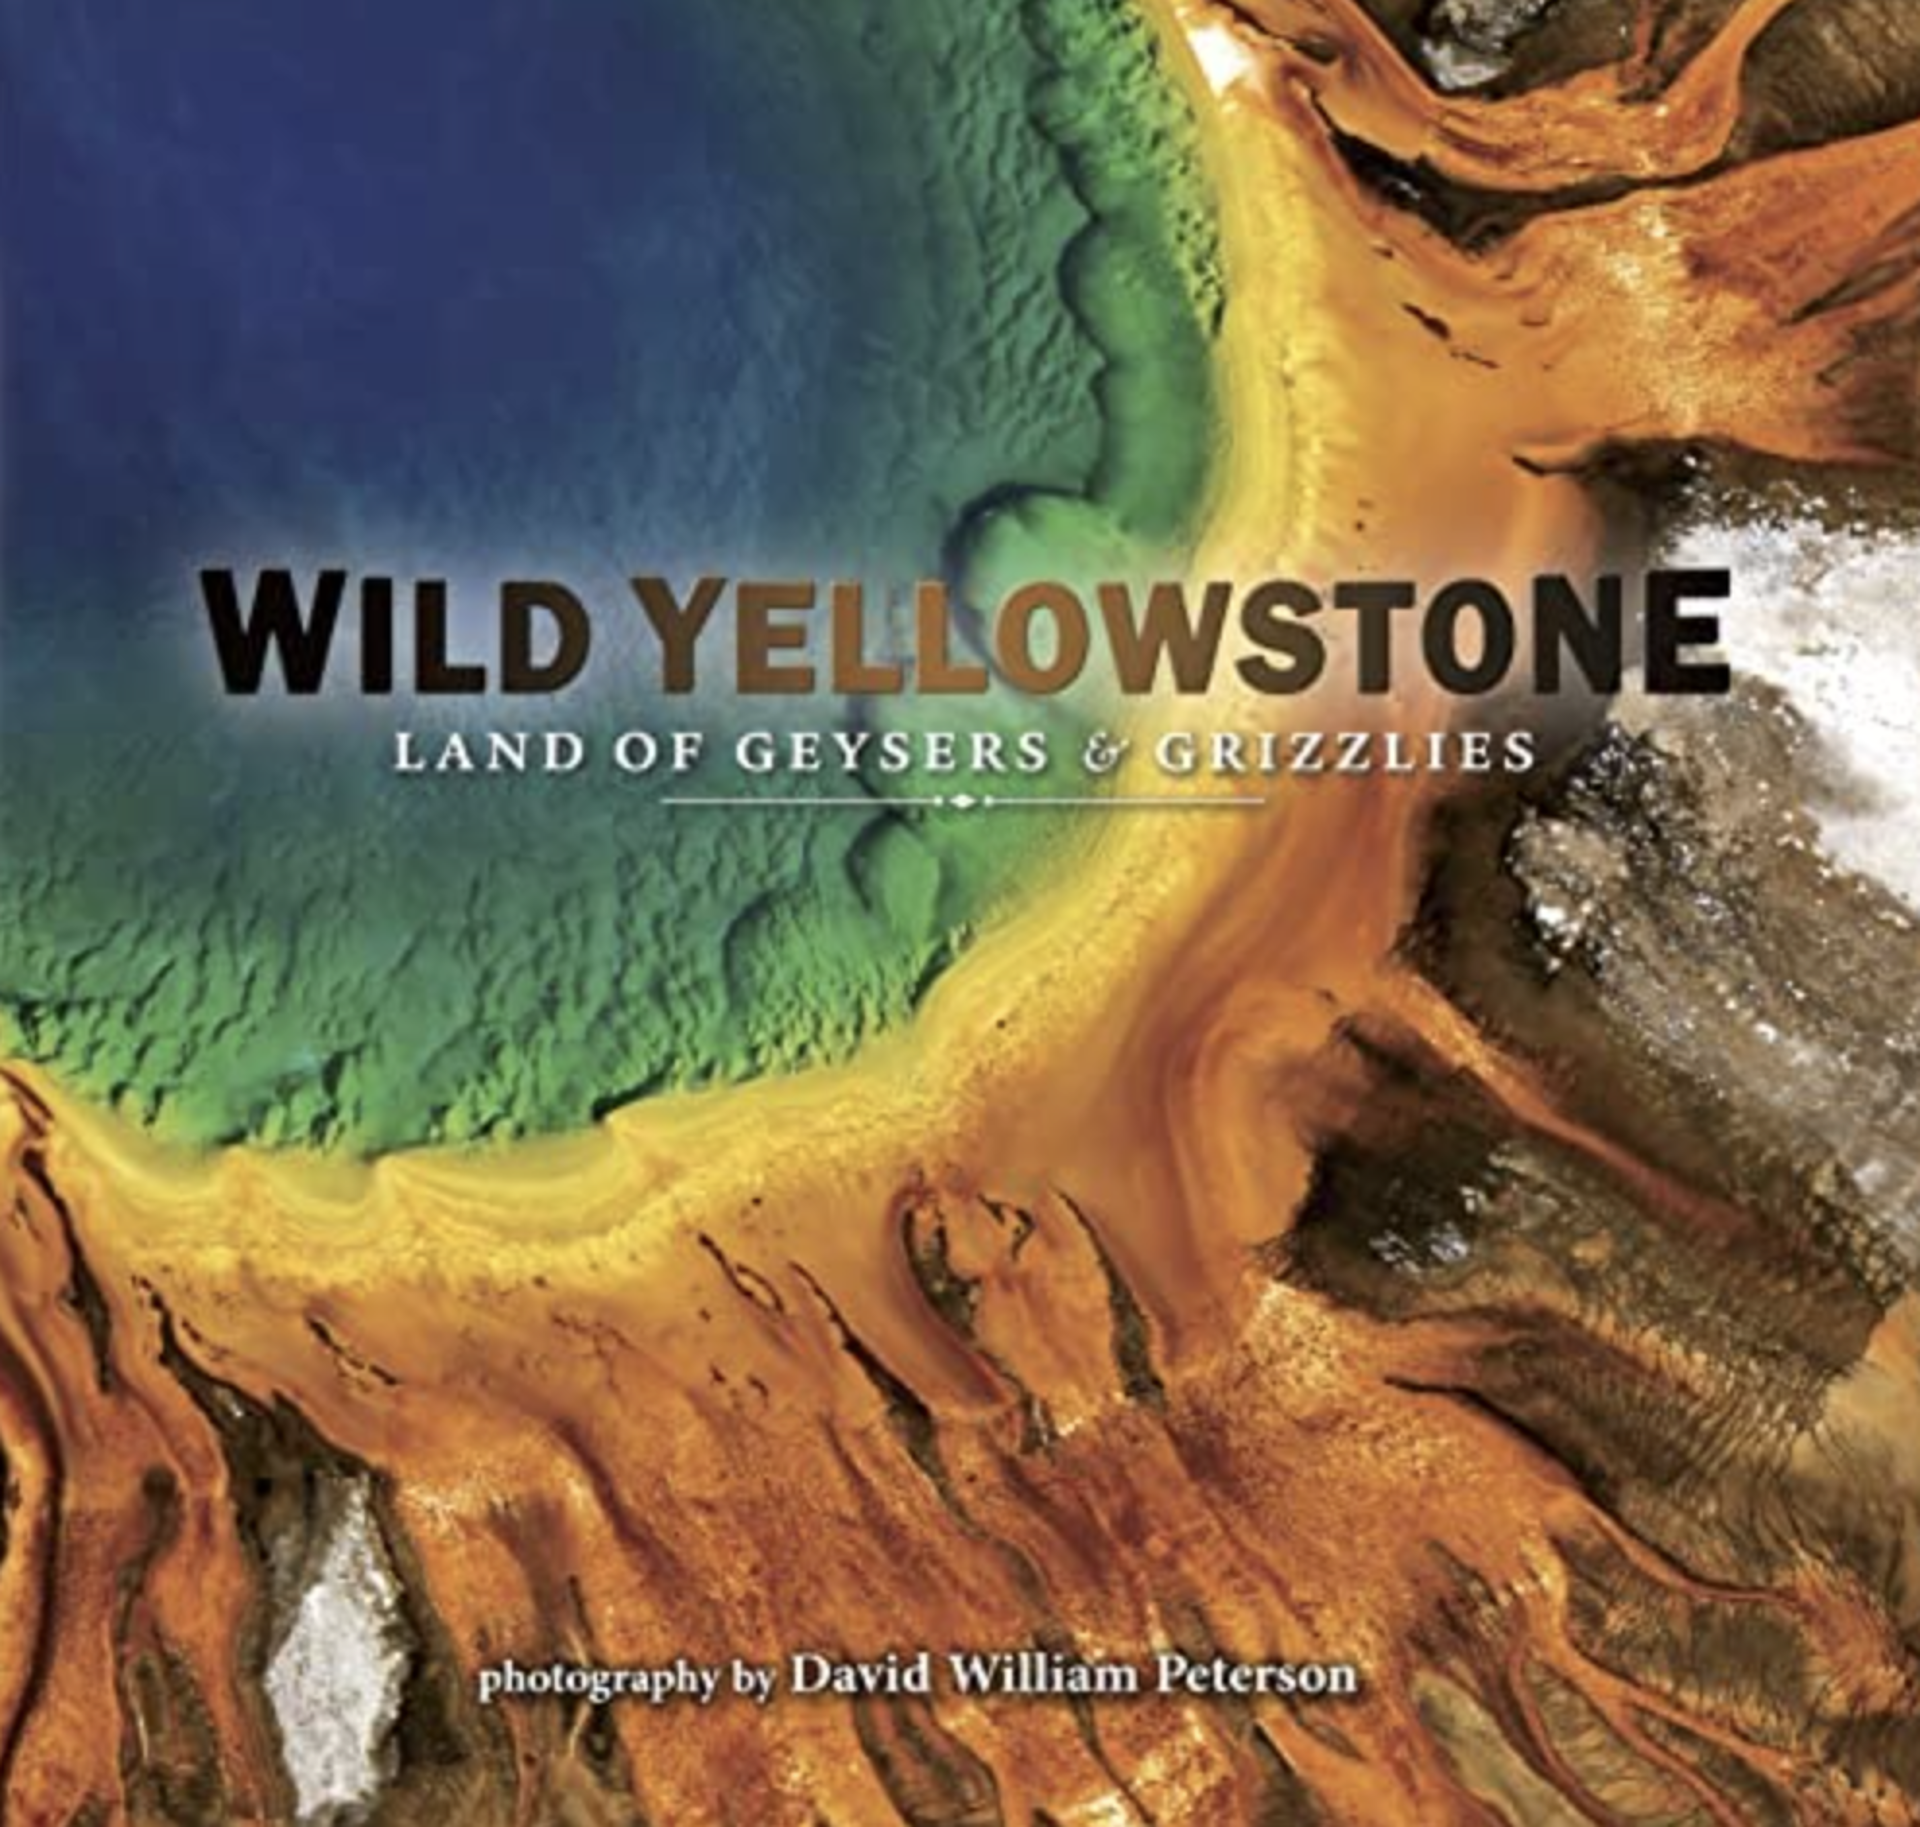 WILD YELLOWSTONE LAND OF GEYSERS & GRIZZLIES by David William Peterson